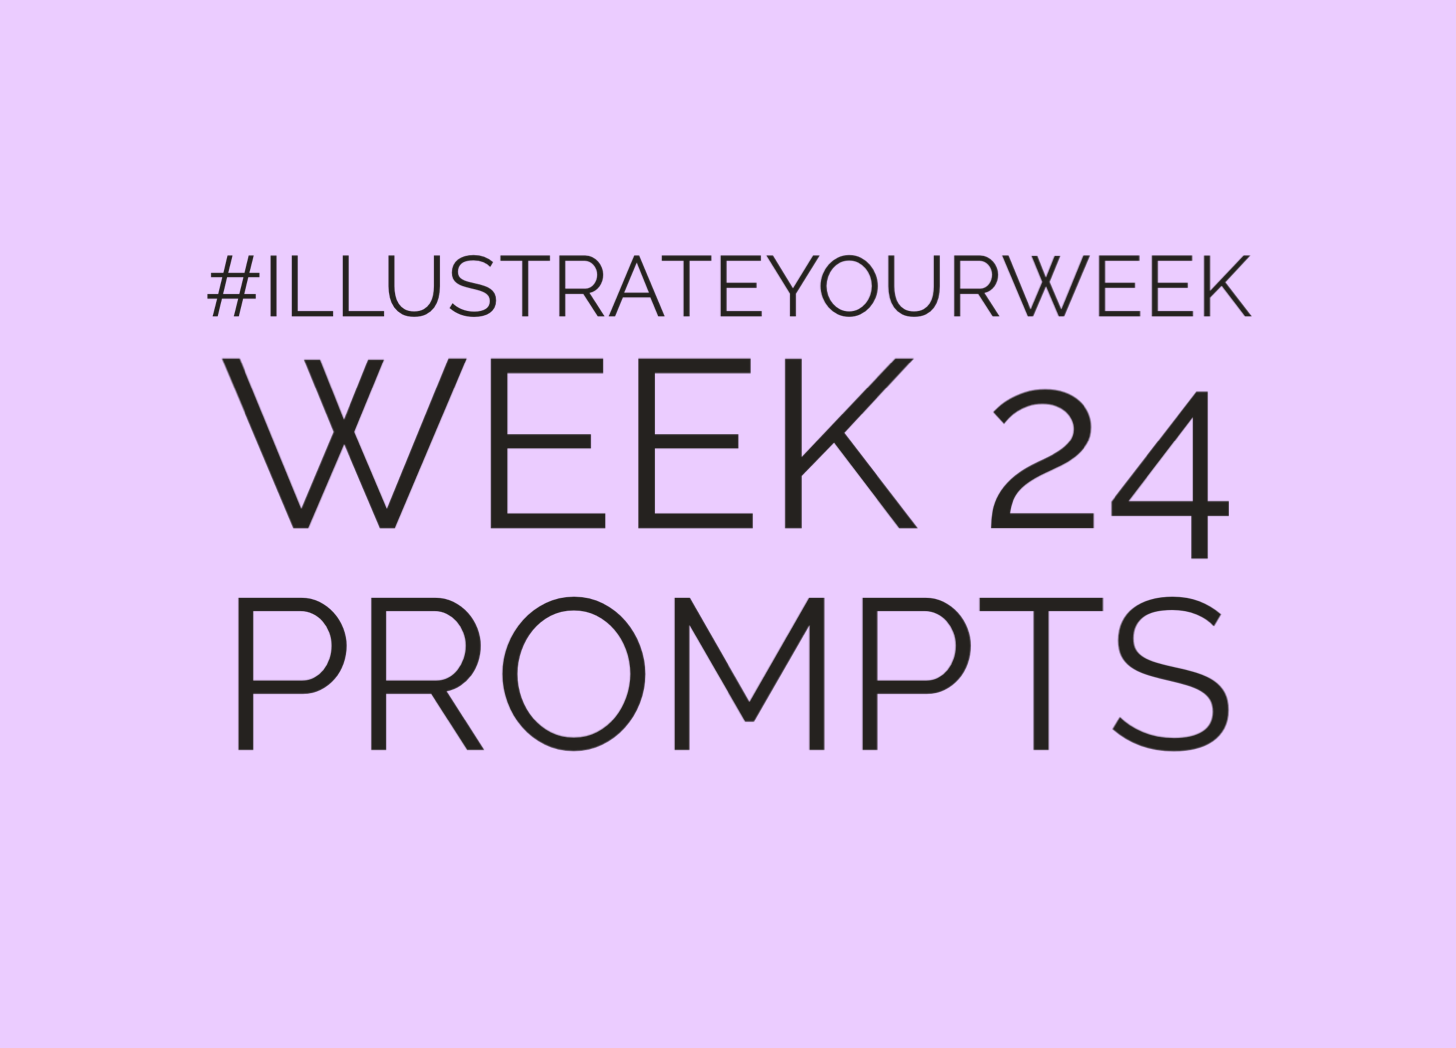 Week 24 Prompts for Illustrate Your Week headline only